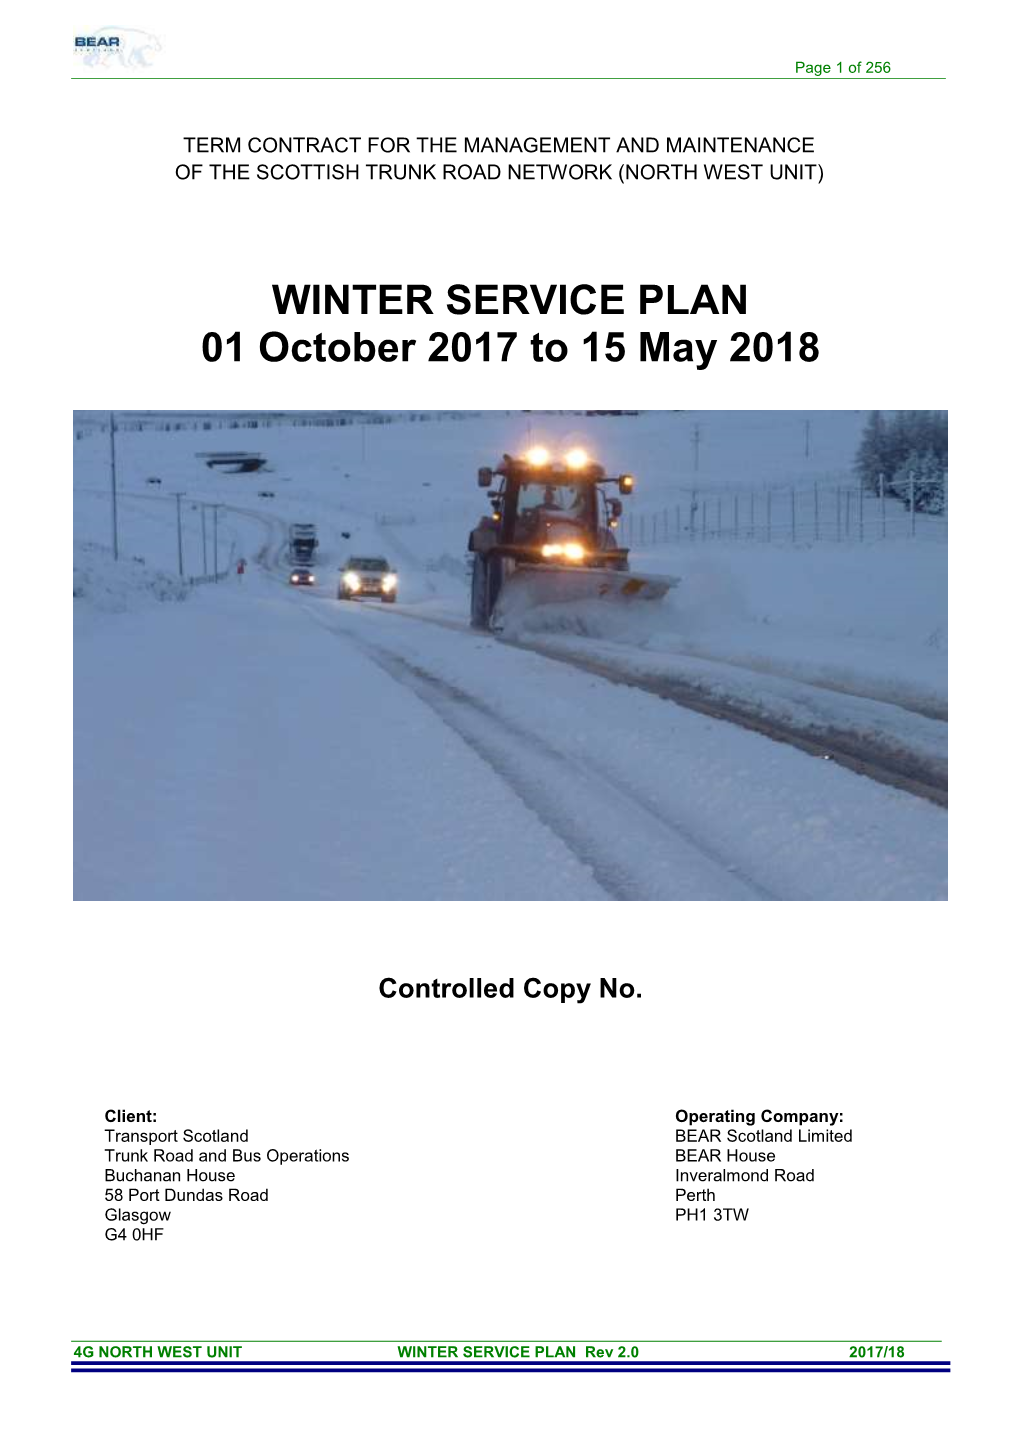 WINTER SERVICE PLAN 01 October 2017 to 15 May 2018